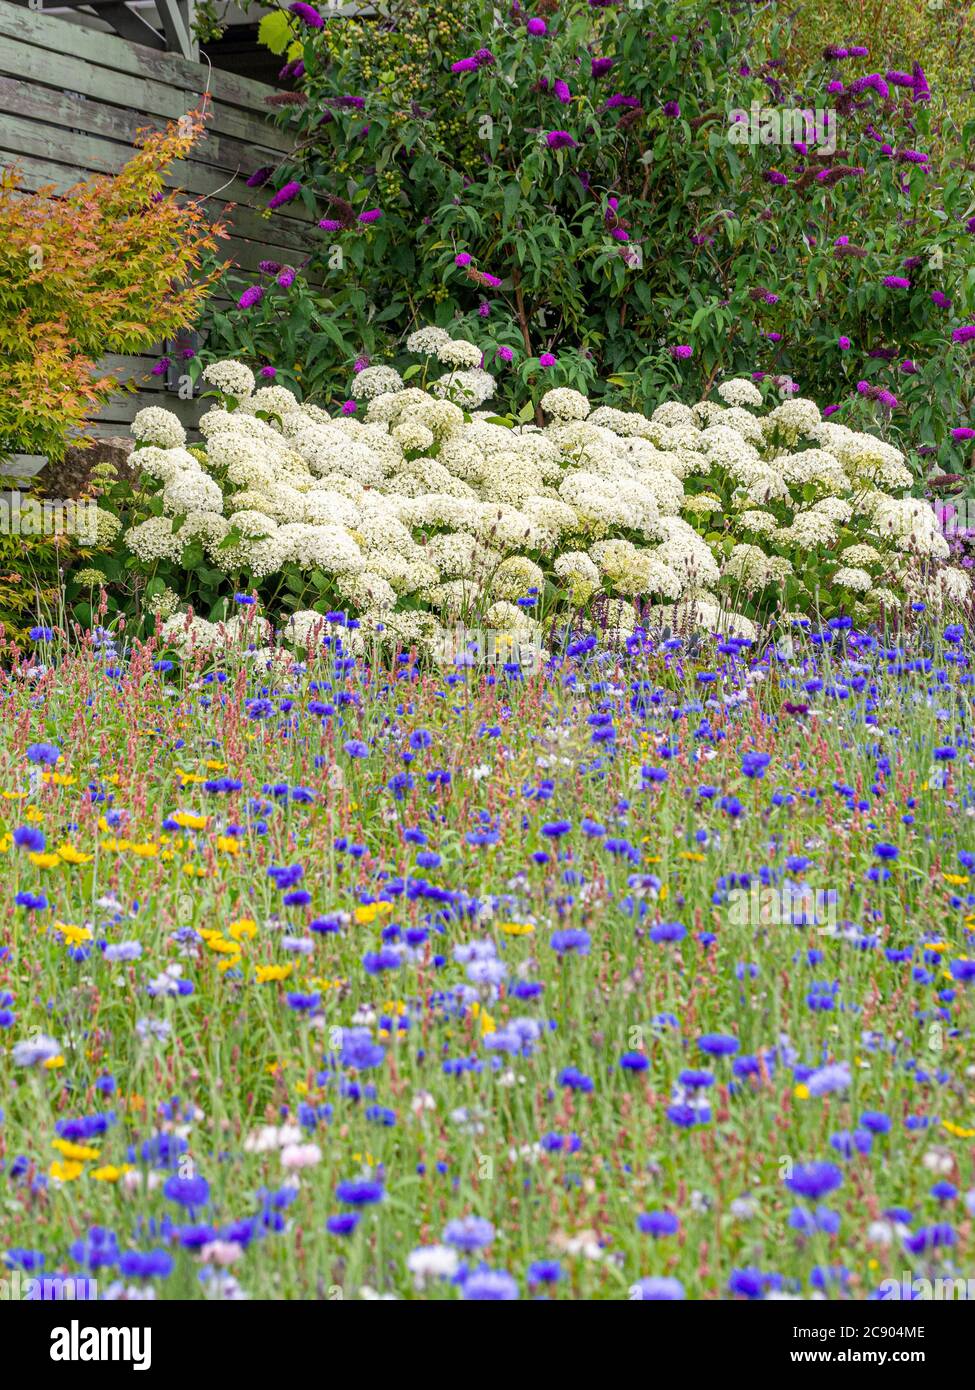 Blue cornflower meadow with white hydrangea 'Annabelle' in the background in a UK garden. Stock Photo